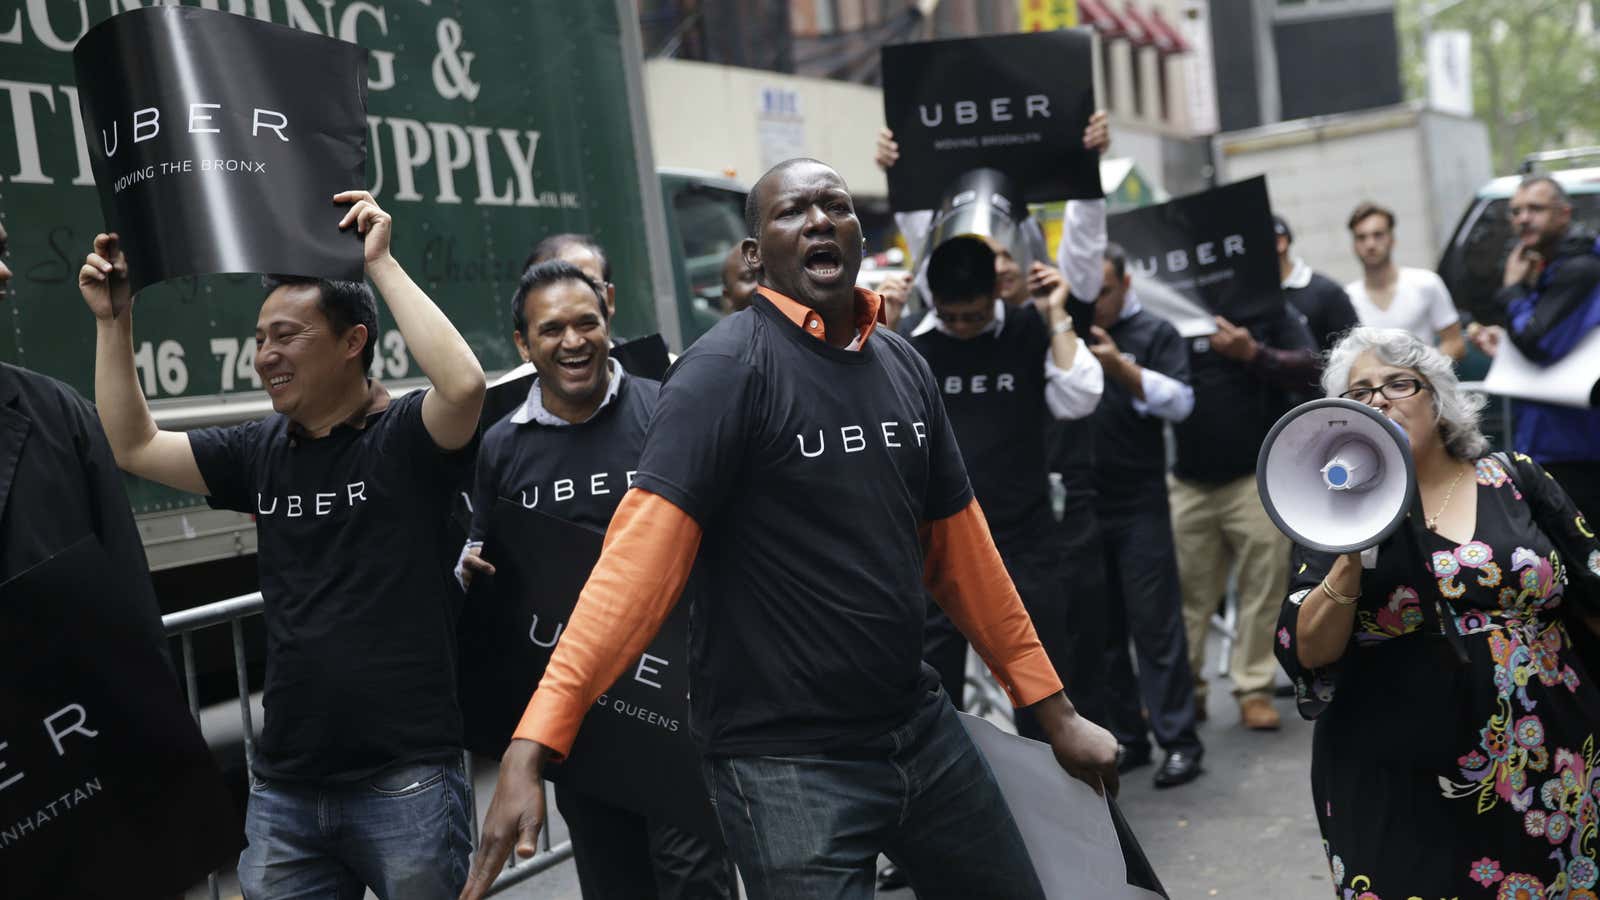 This protest brought to you by Uber.